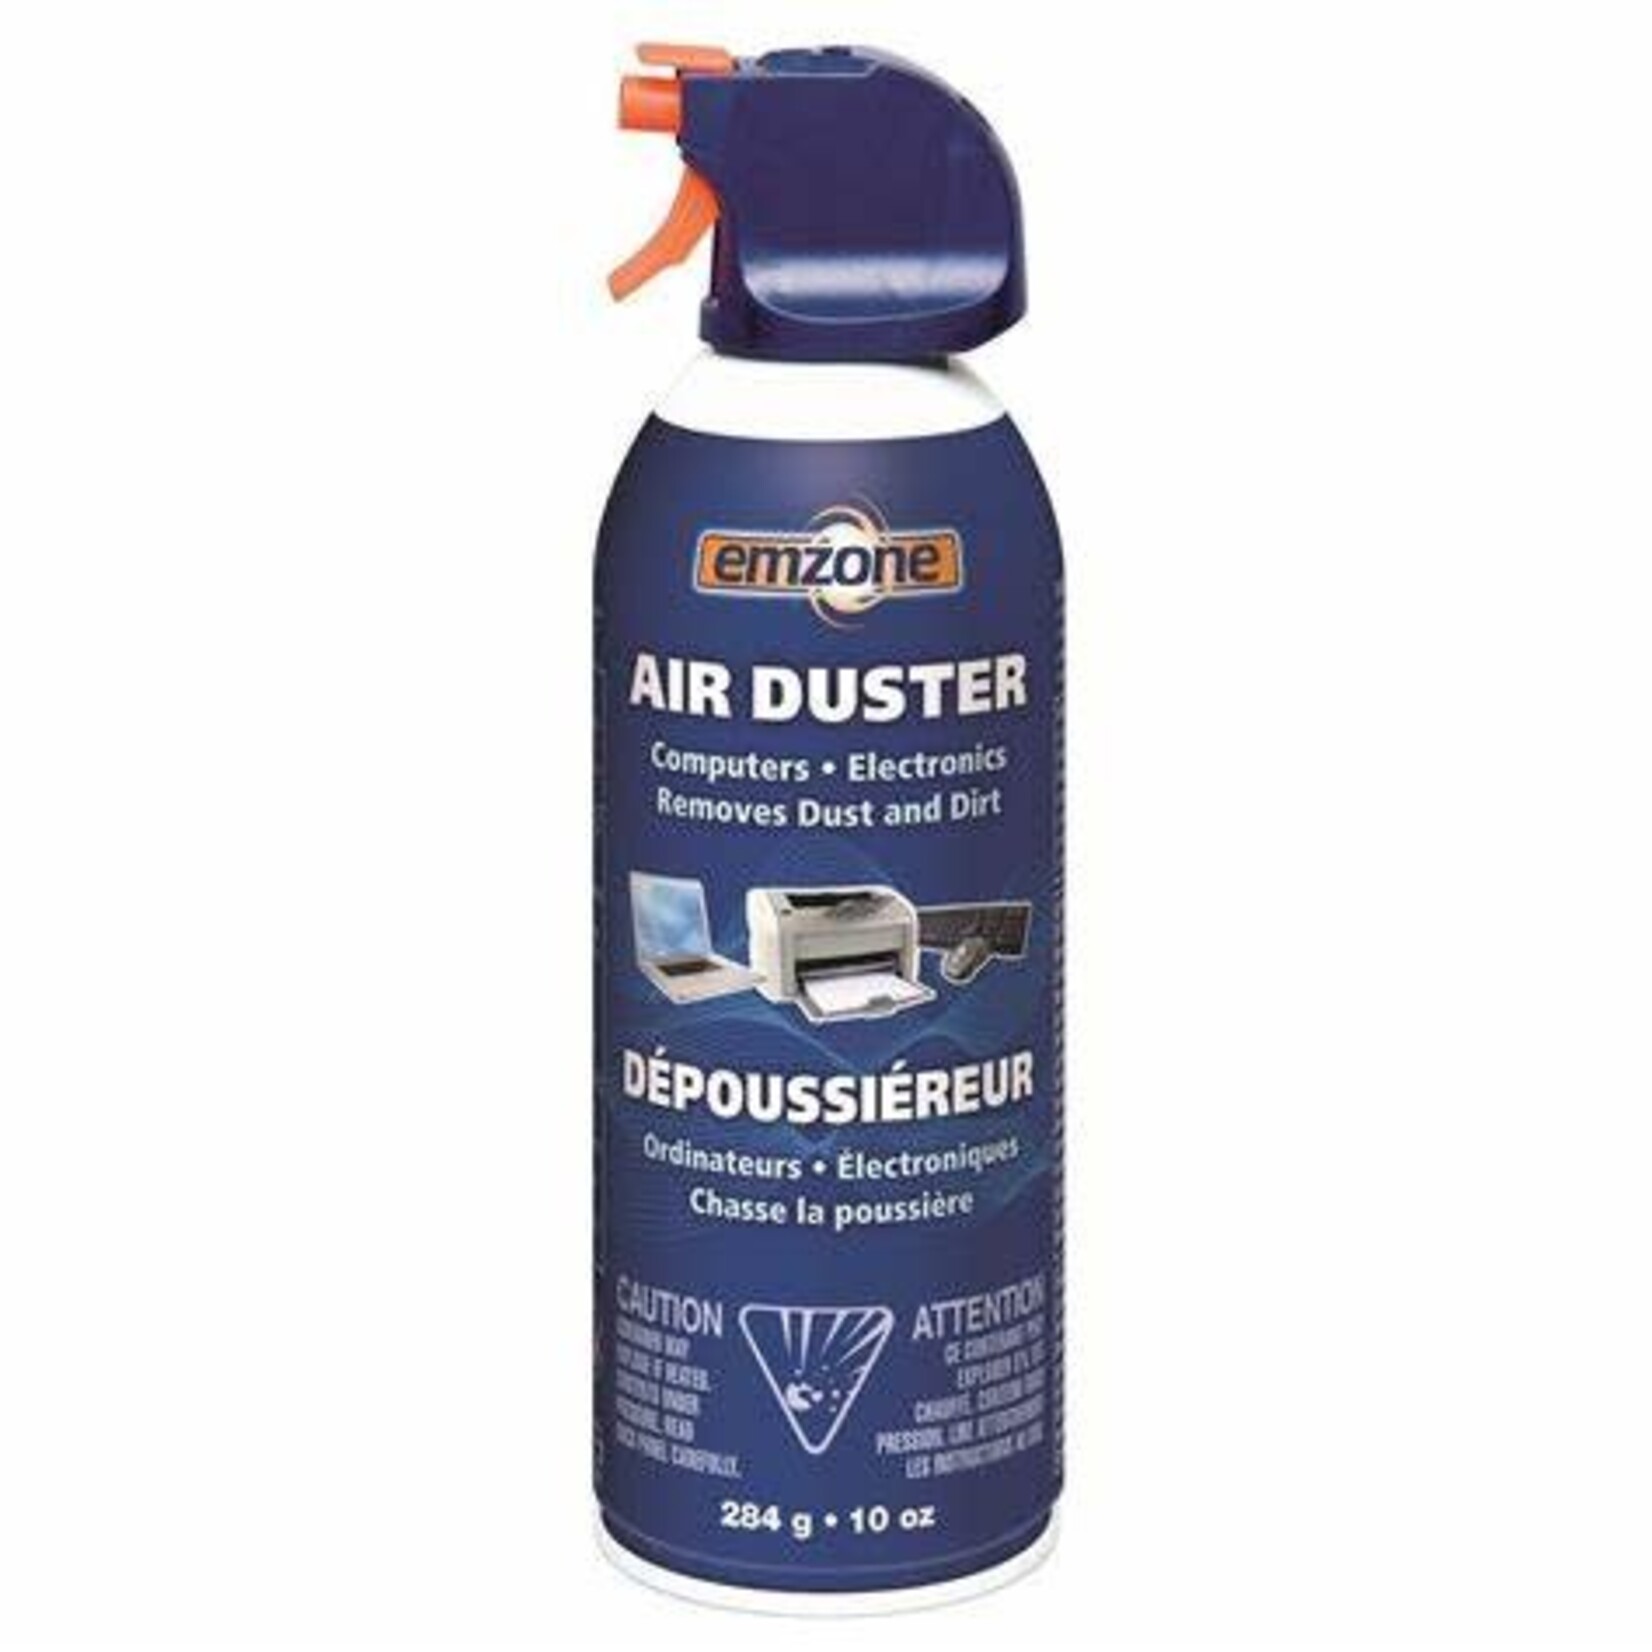 Differences in Air Dusters Explained